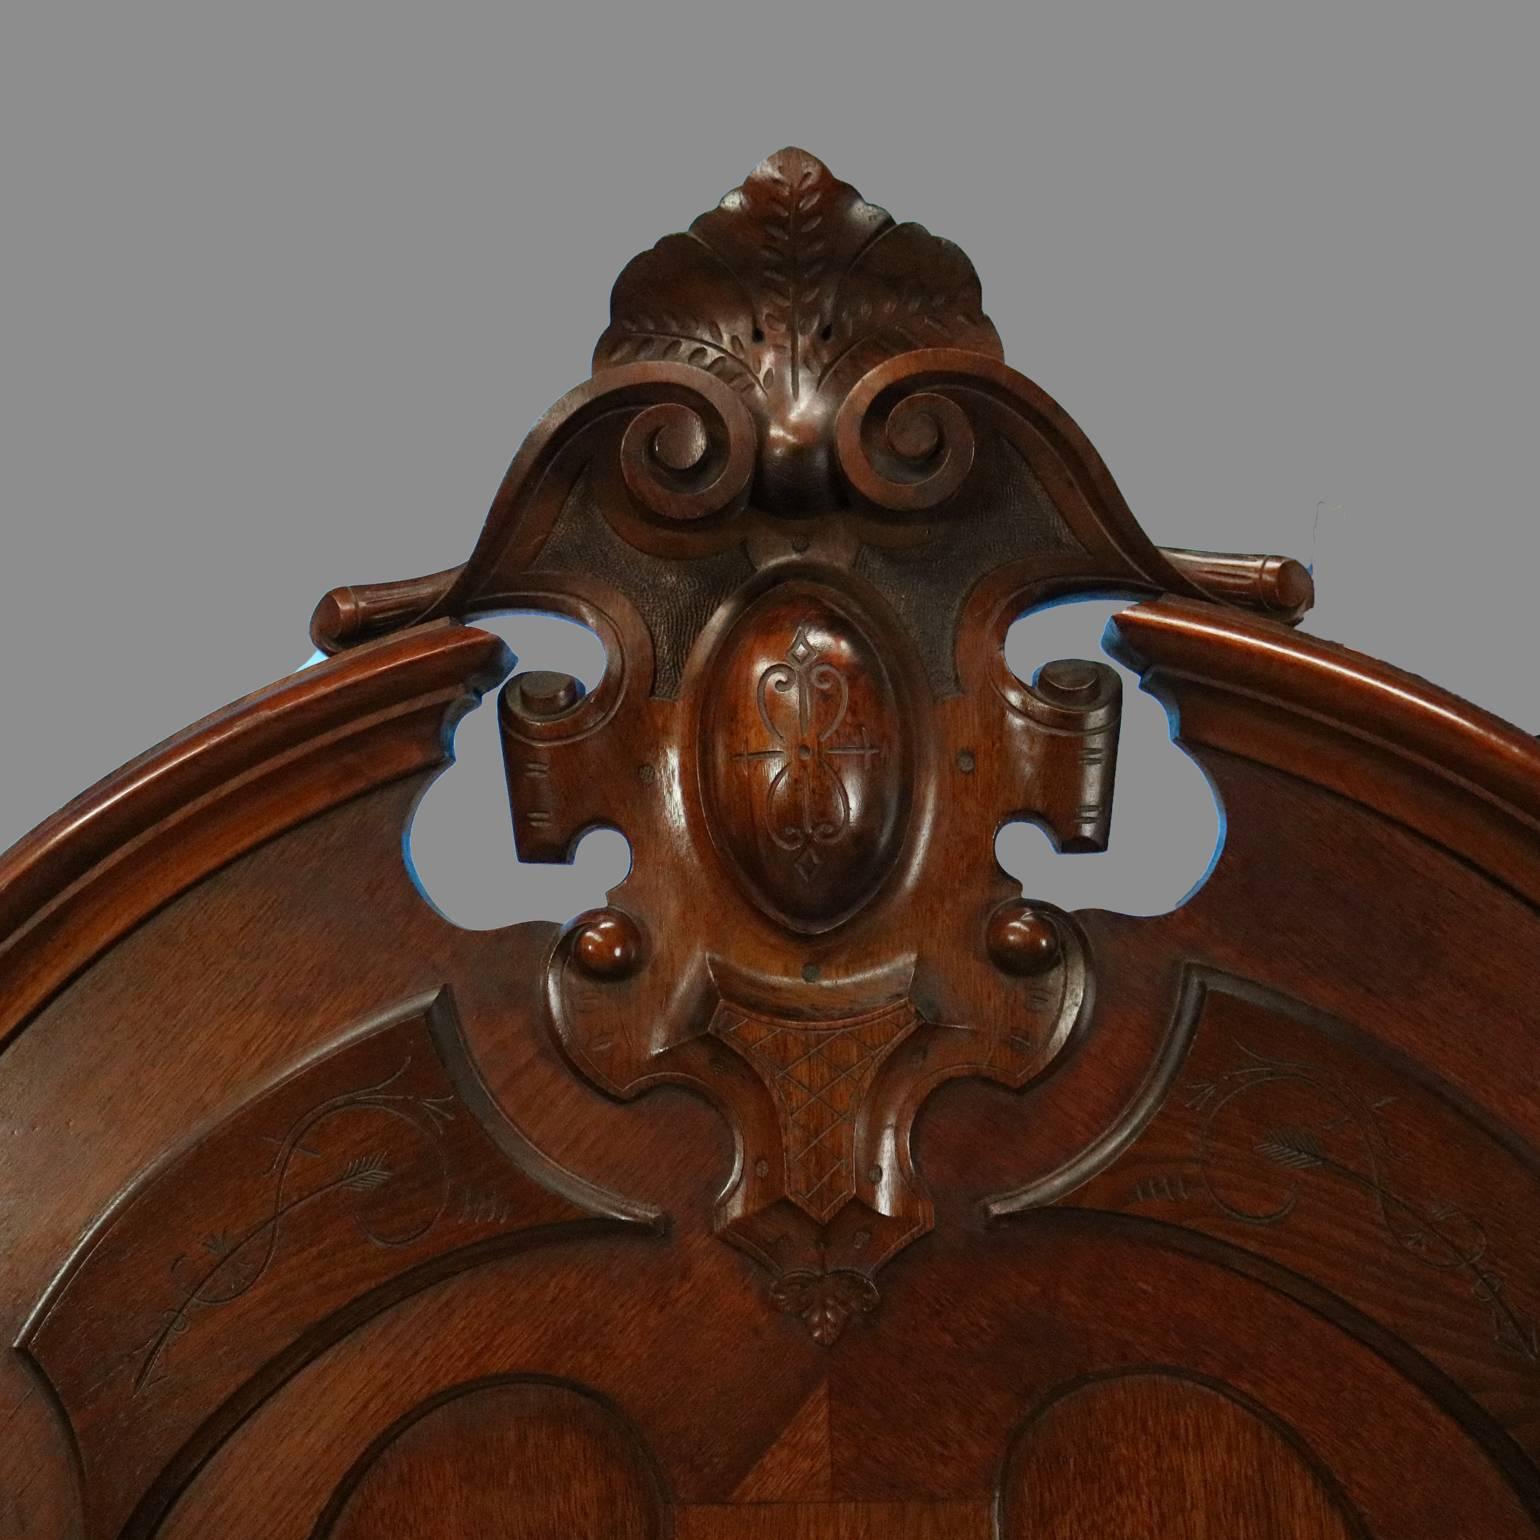 Antique carved walnut Rococo full size bed frame features high back with central scroll and foliate cartouche flanked urn form finials; carved scroll and acanthus decorated footboard, circa 1880.

Measures: 81" H x 6" W (exterior) x